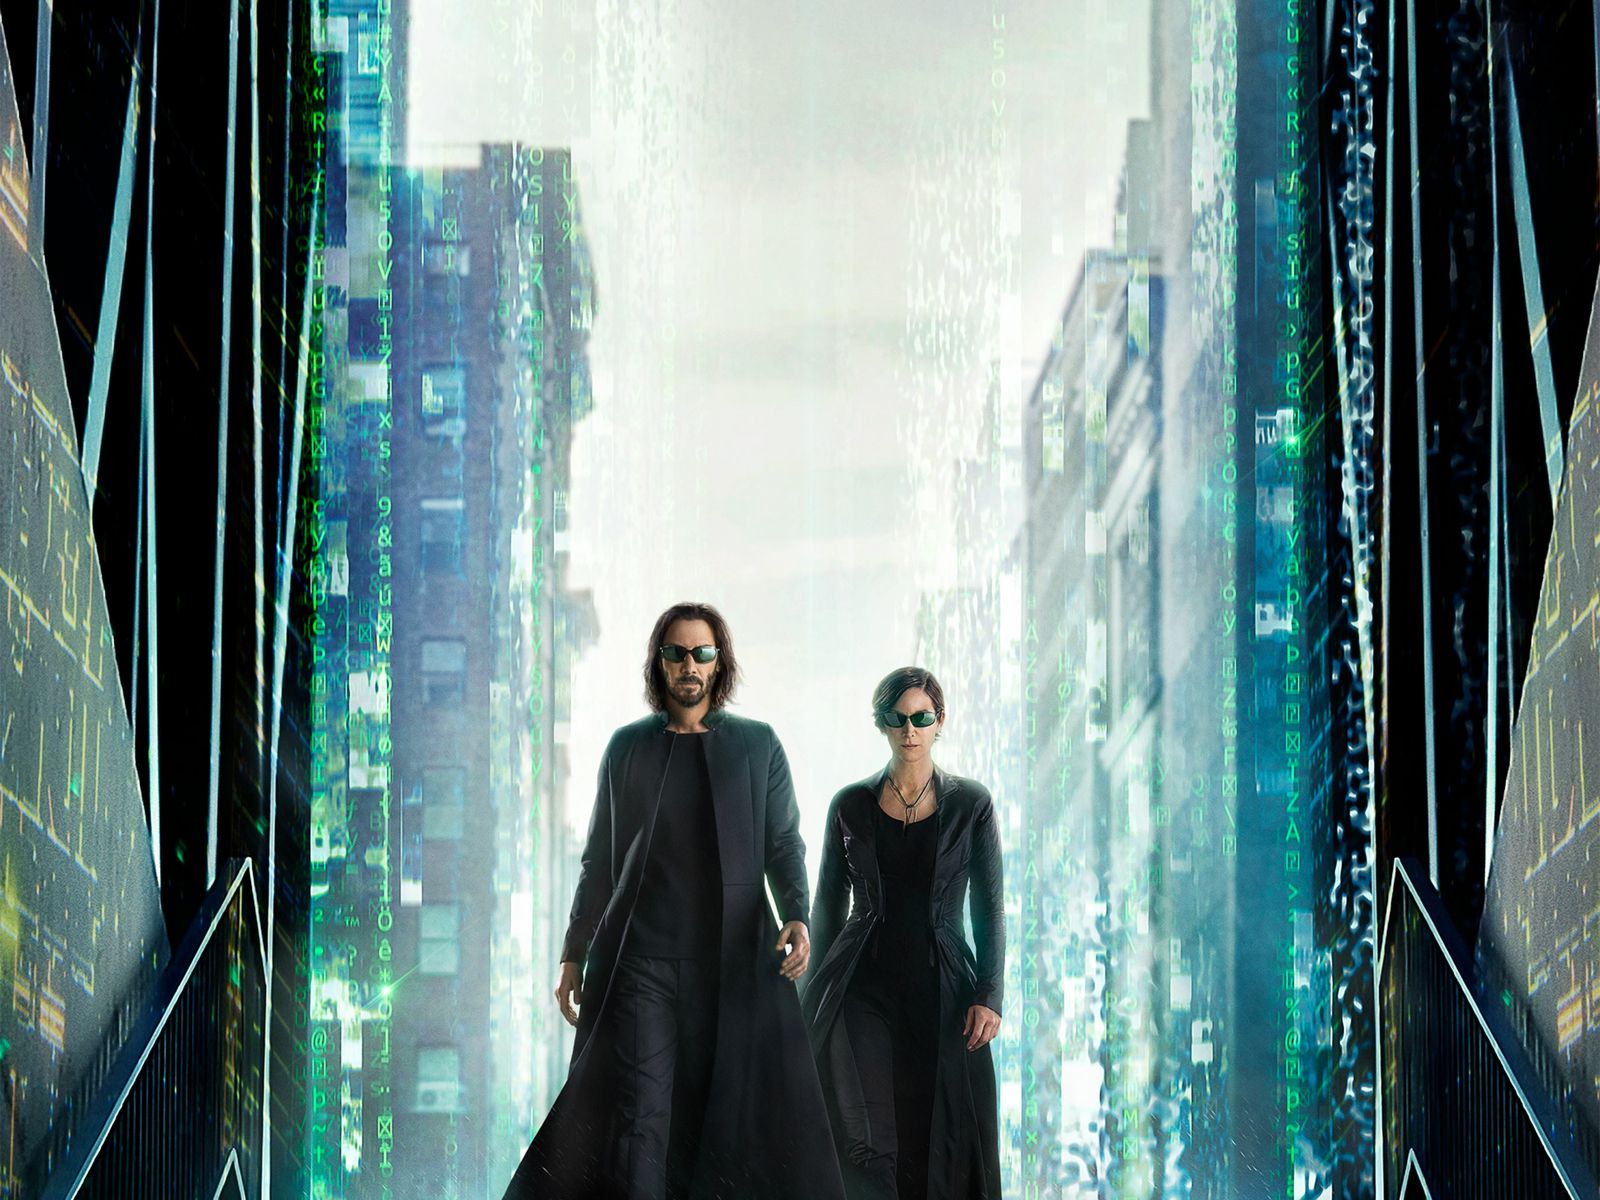 The Matrix Resurrections: The Crazy Graphics, The Love Tale, And The Big Reveal